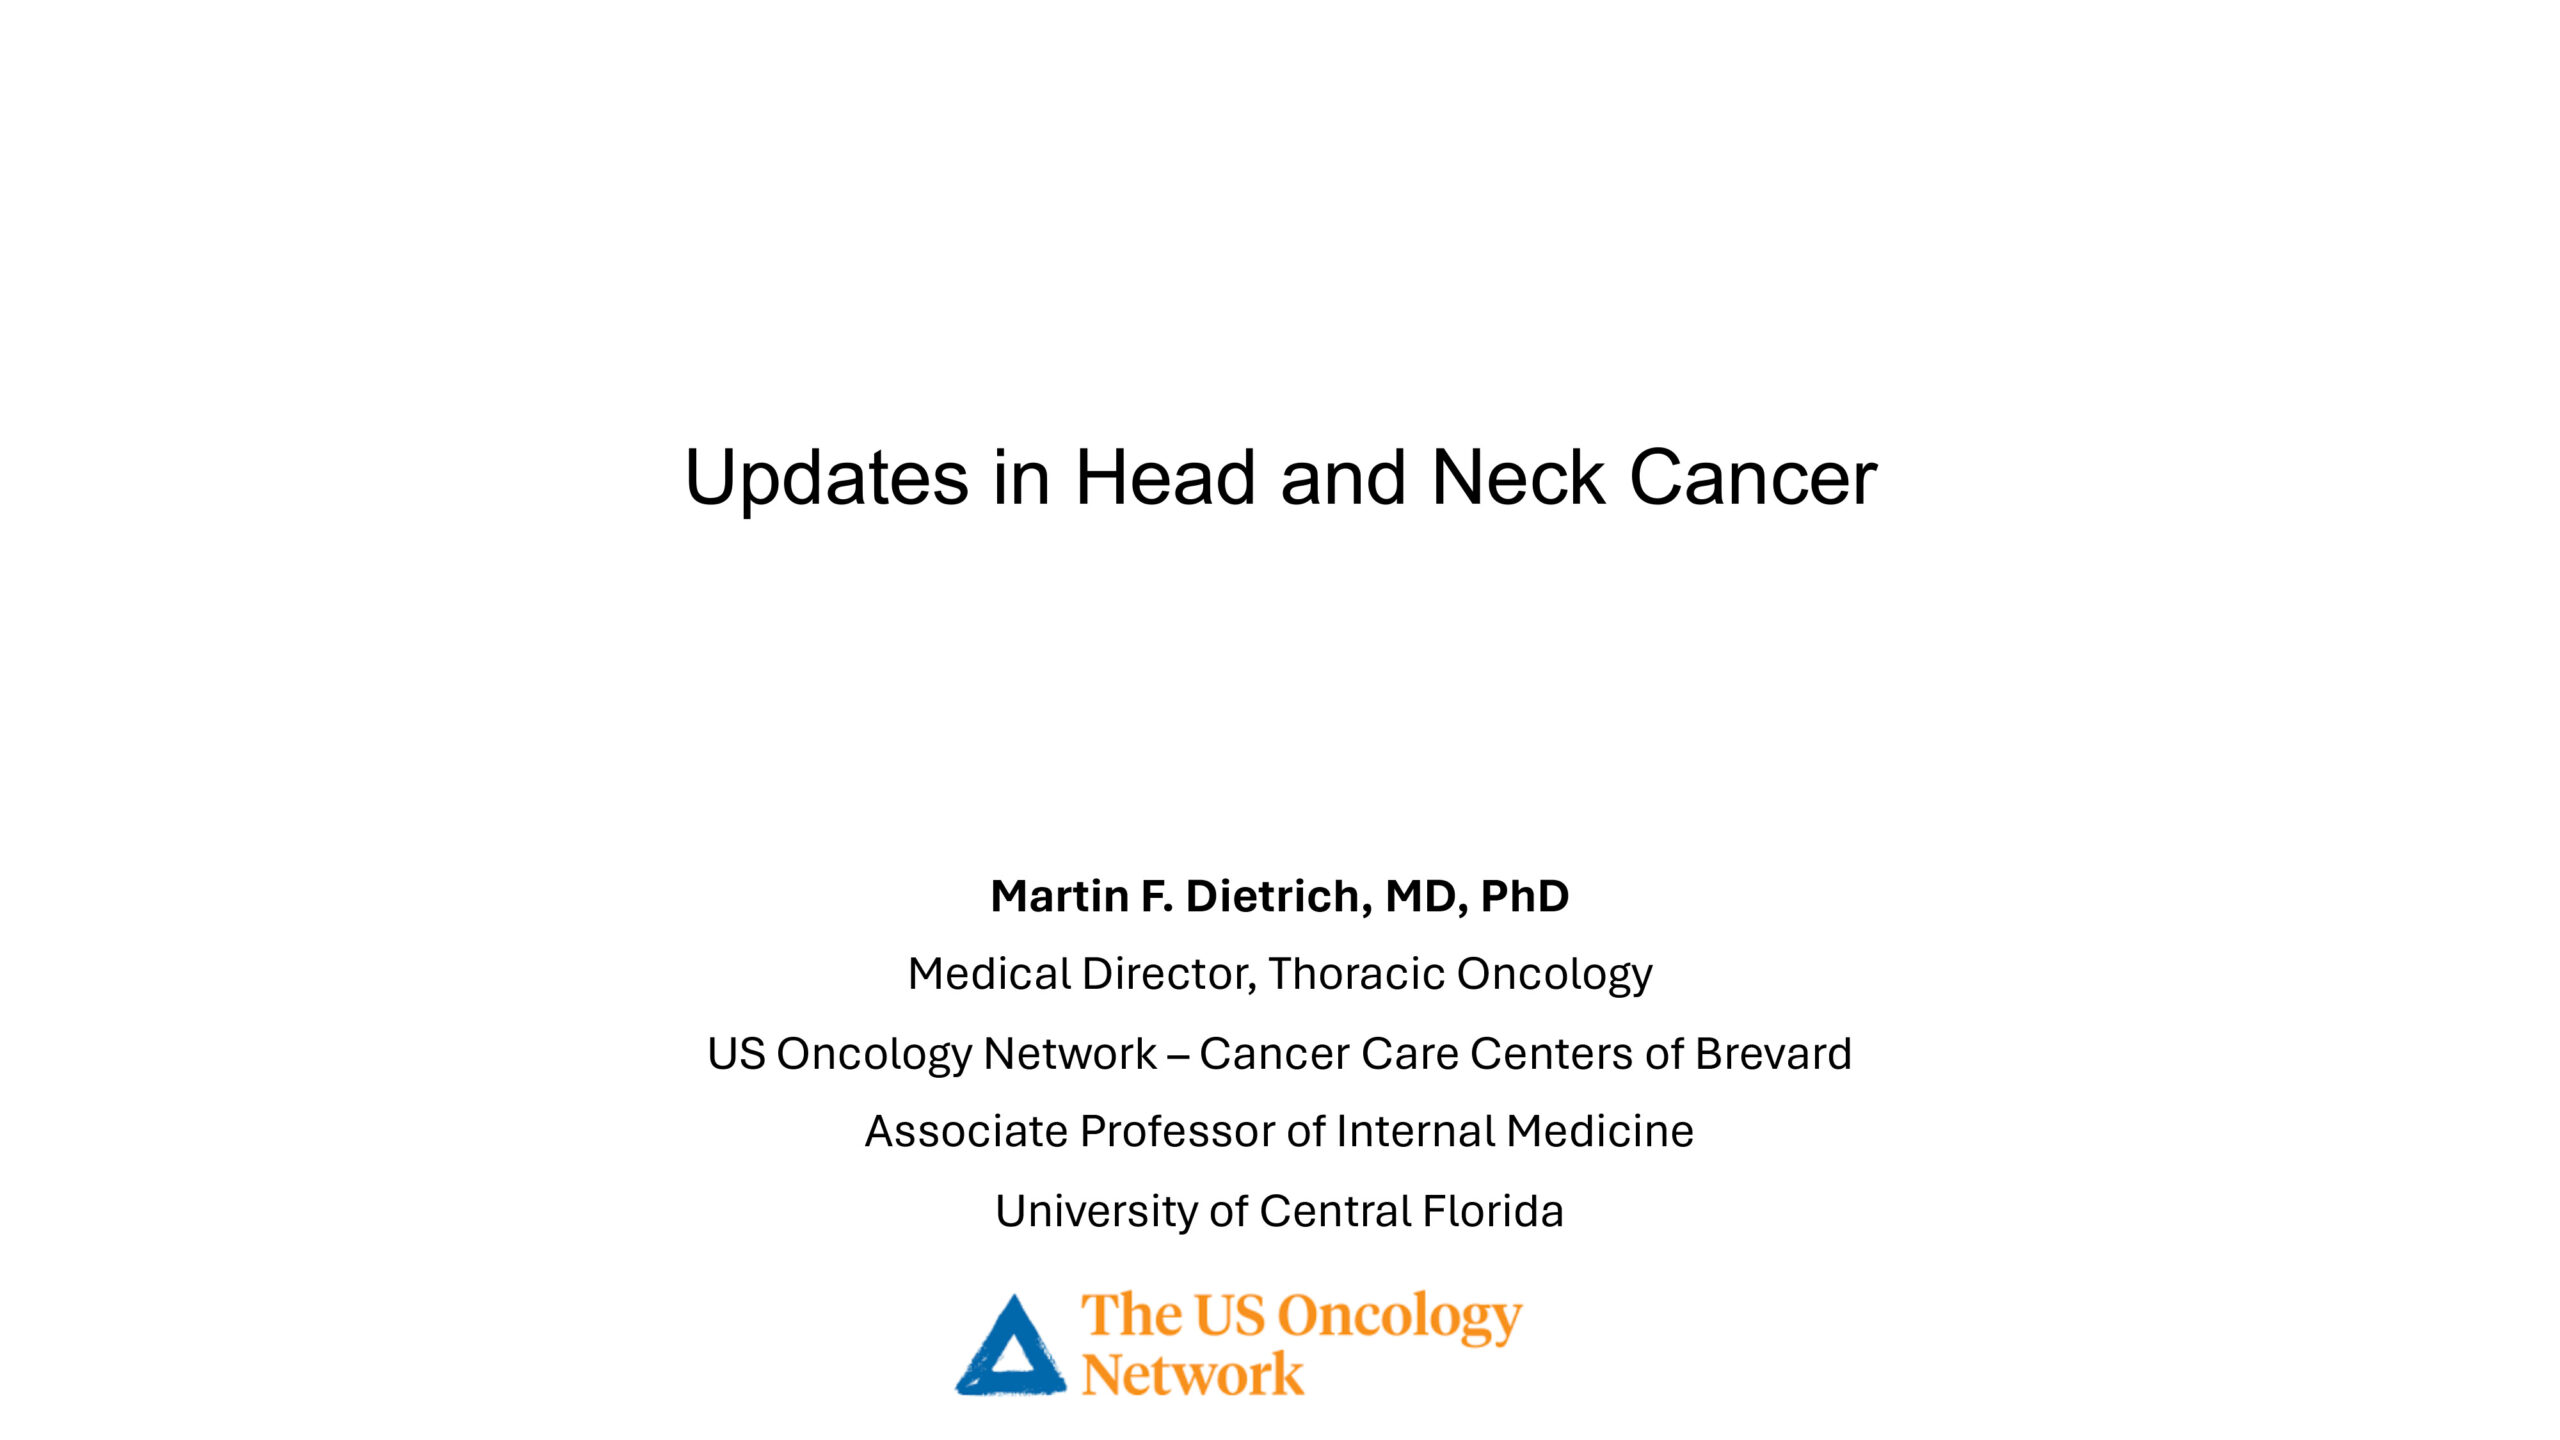 Immunotherapy and Targeted Agents in Head/Neck Cancer